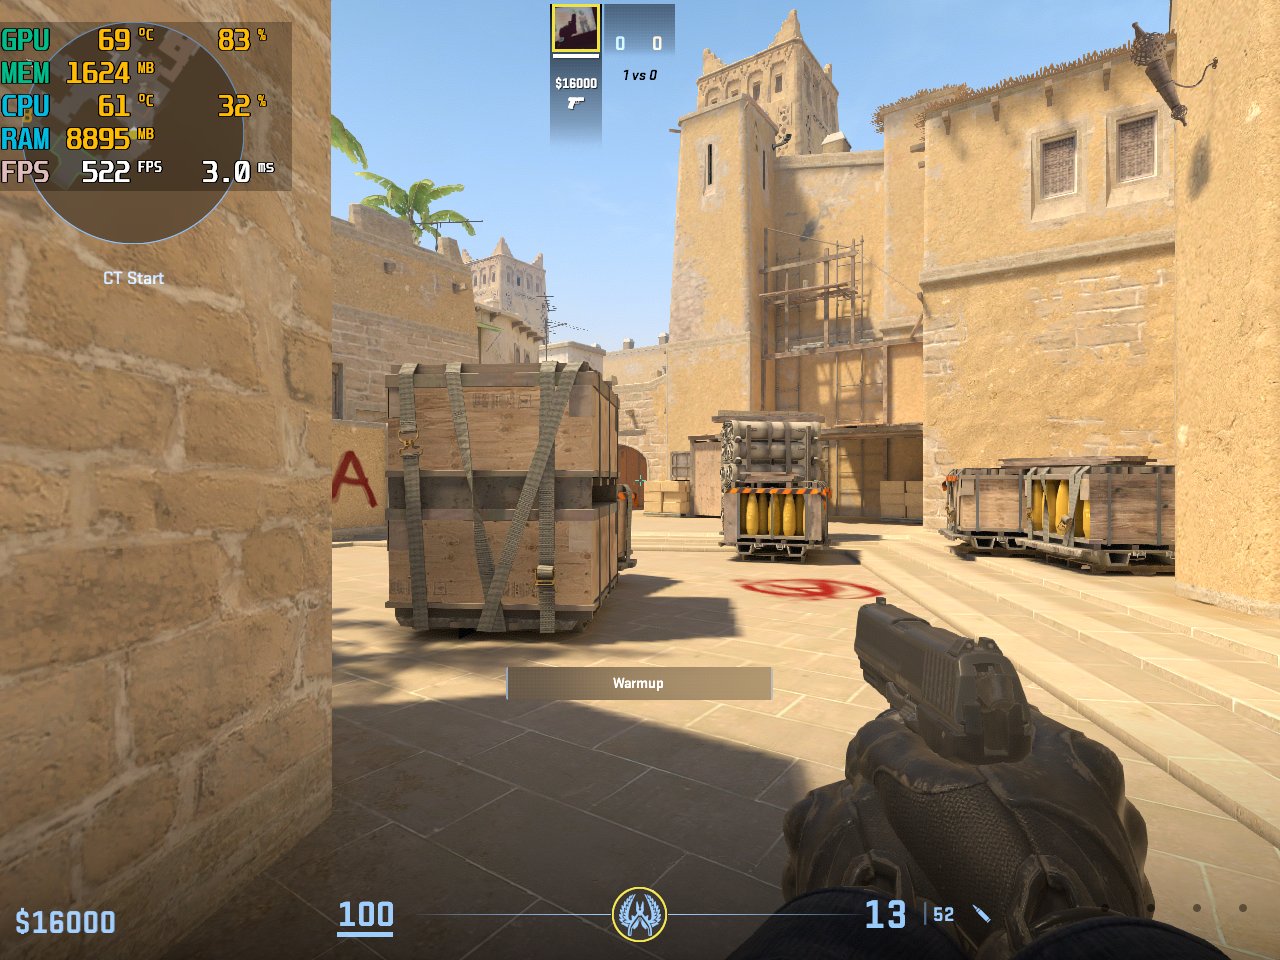 CS2 vs. CS:GO – What's new? What are the differences?